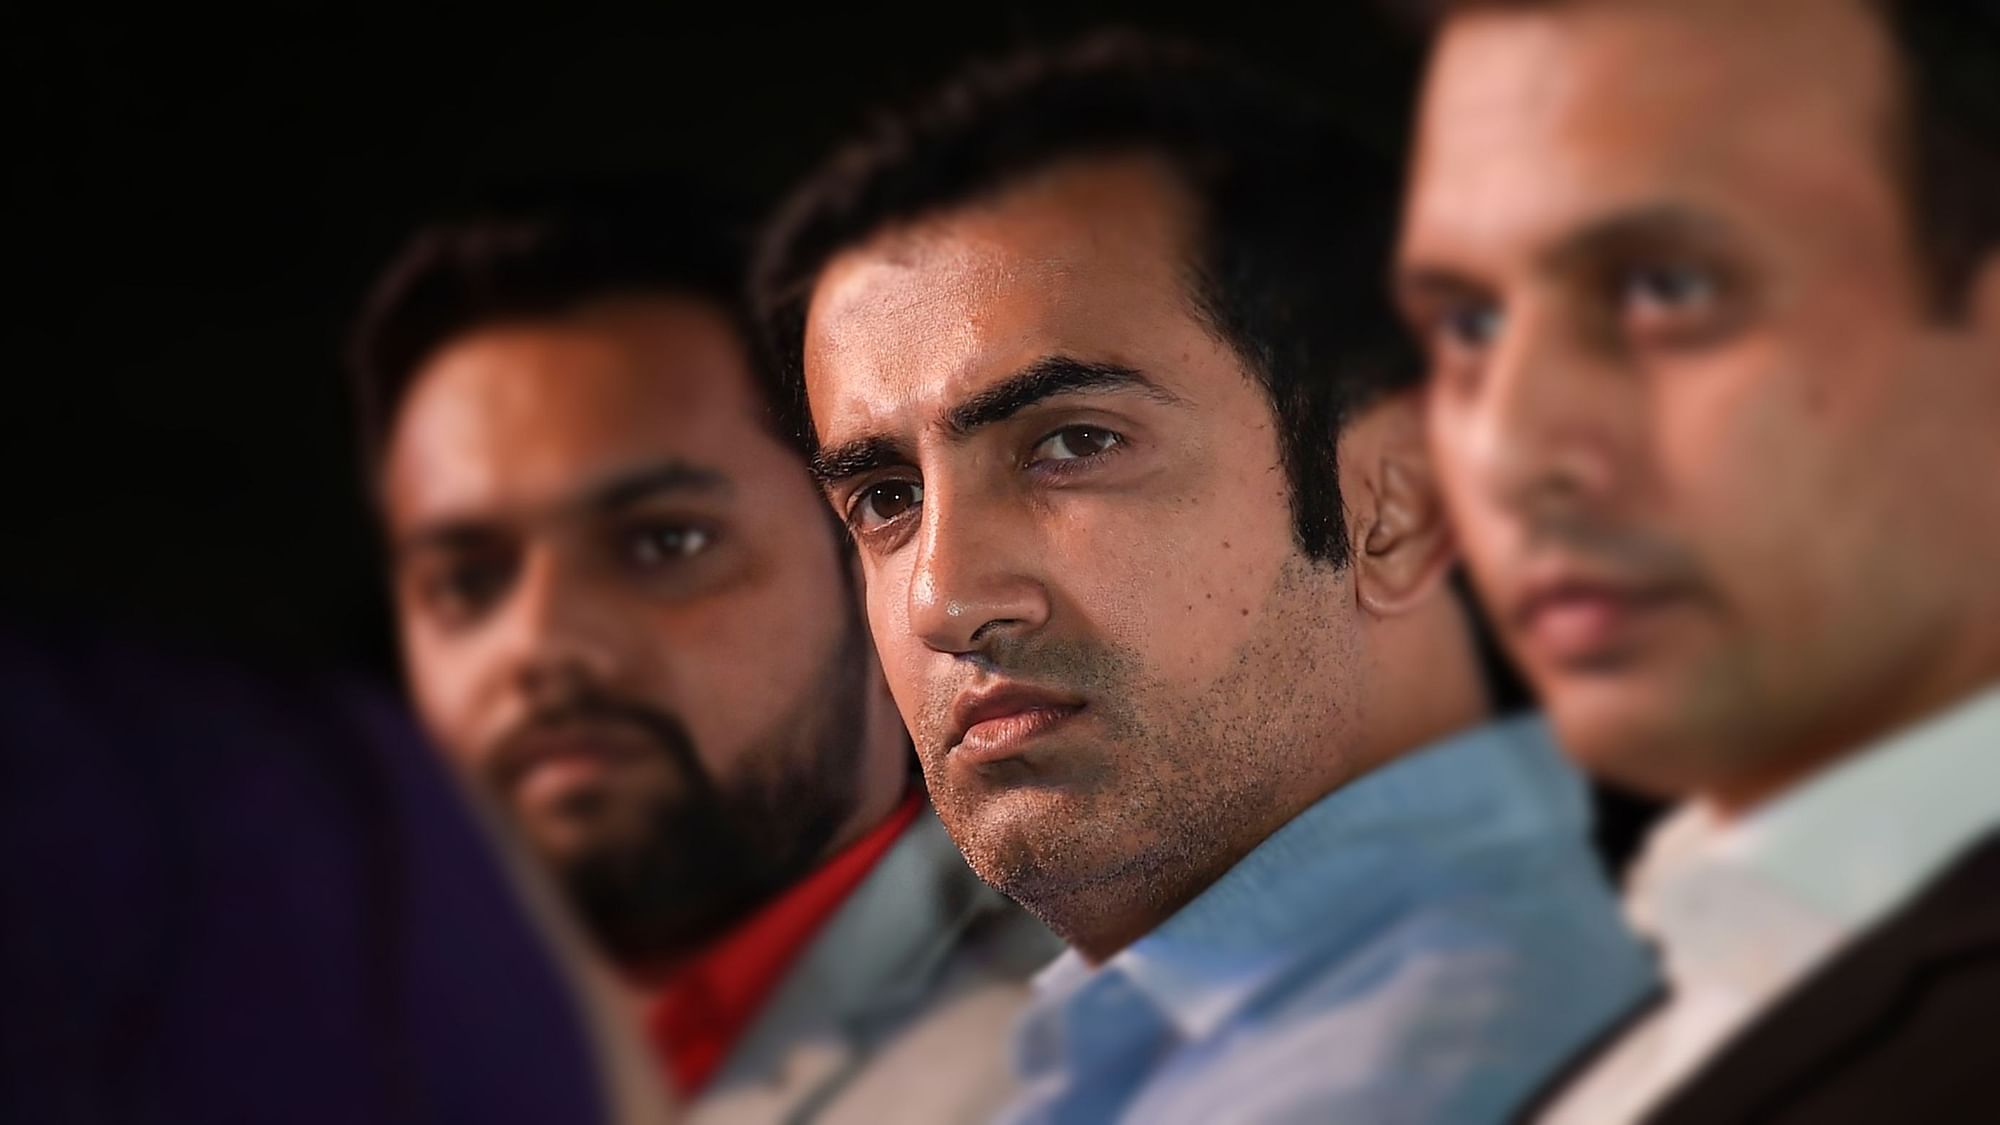 BJP MP Gautam Gambhir on Friday, 27 December said Pakistani cricketer Danish Kaneria’s remark that he was mistreated by a few teammates for being a Hindu showed the “real face of Pakistan”.